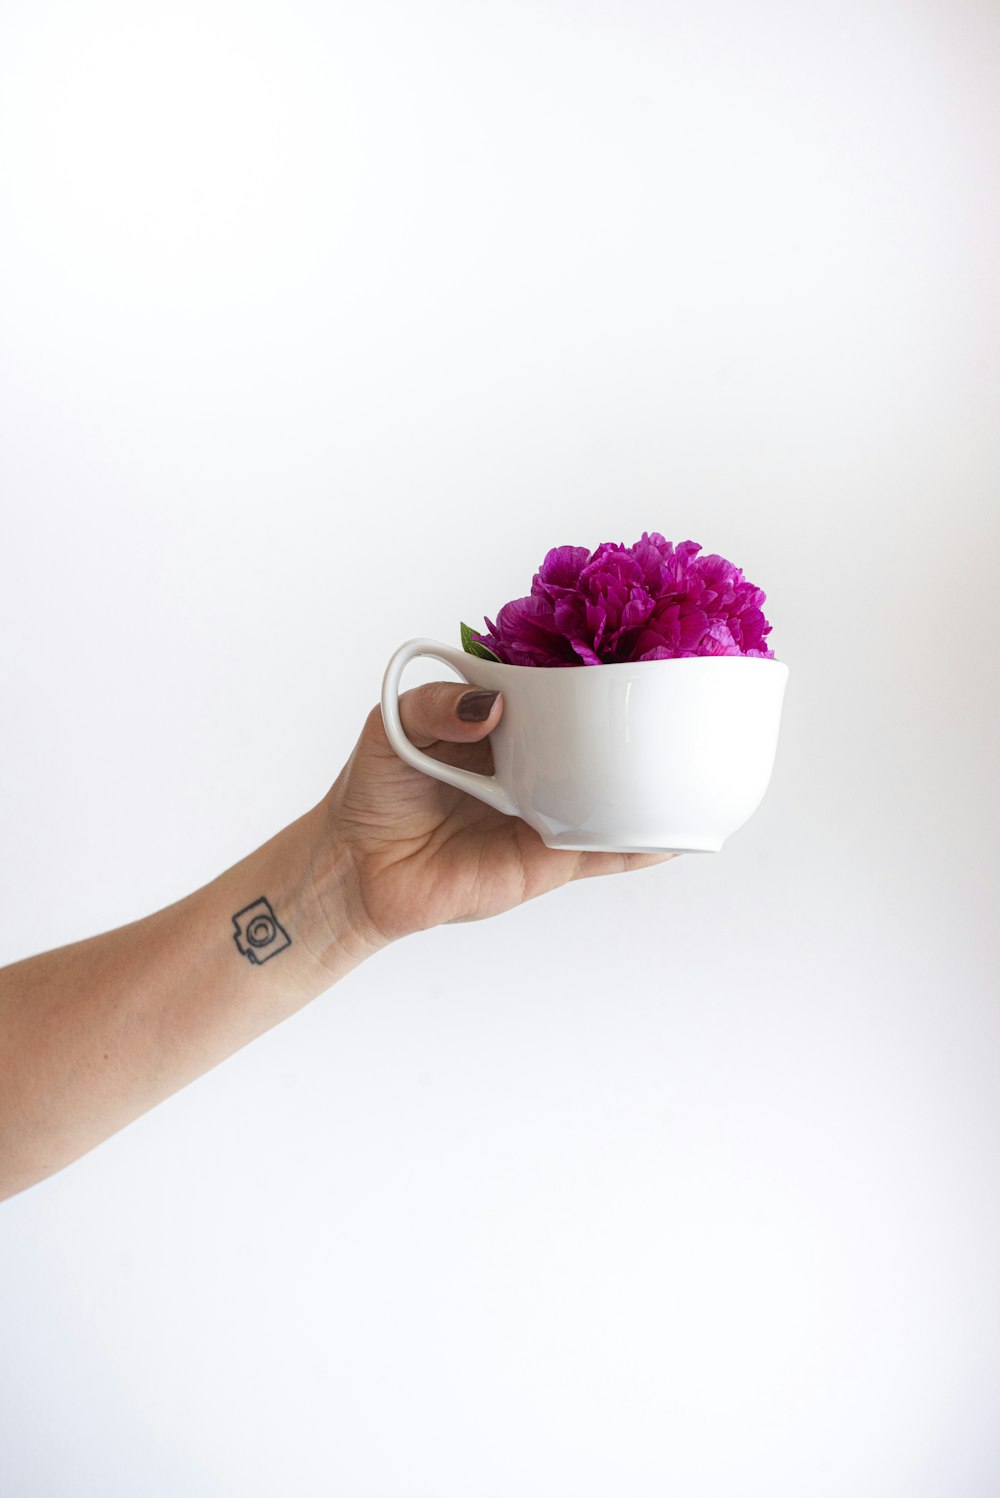 person holding white ceramic mug with pink flowers